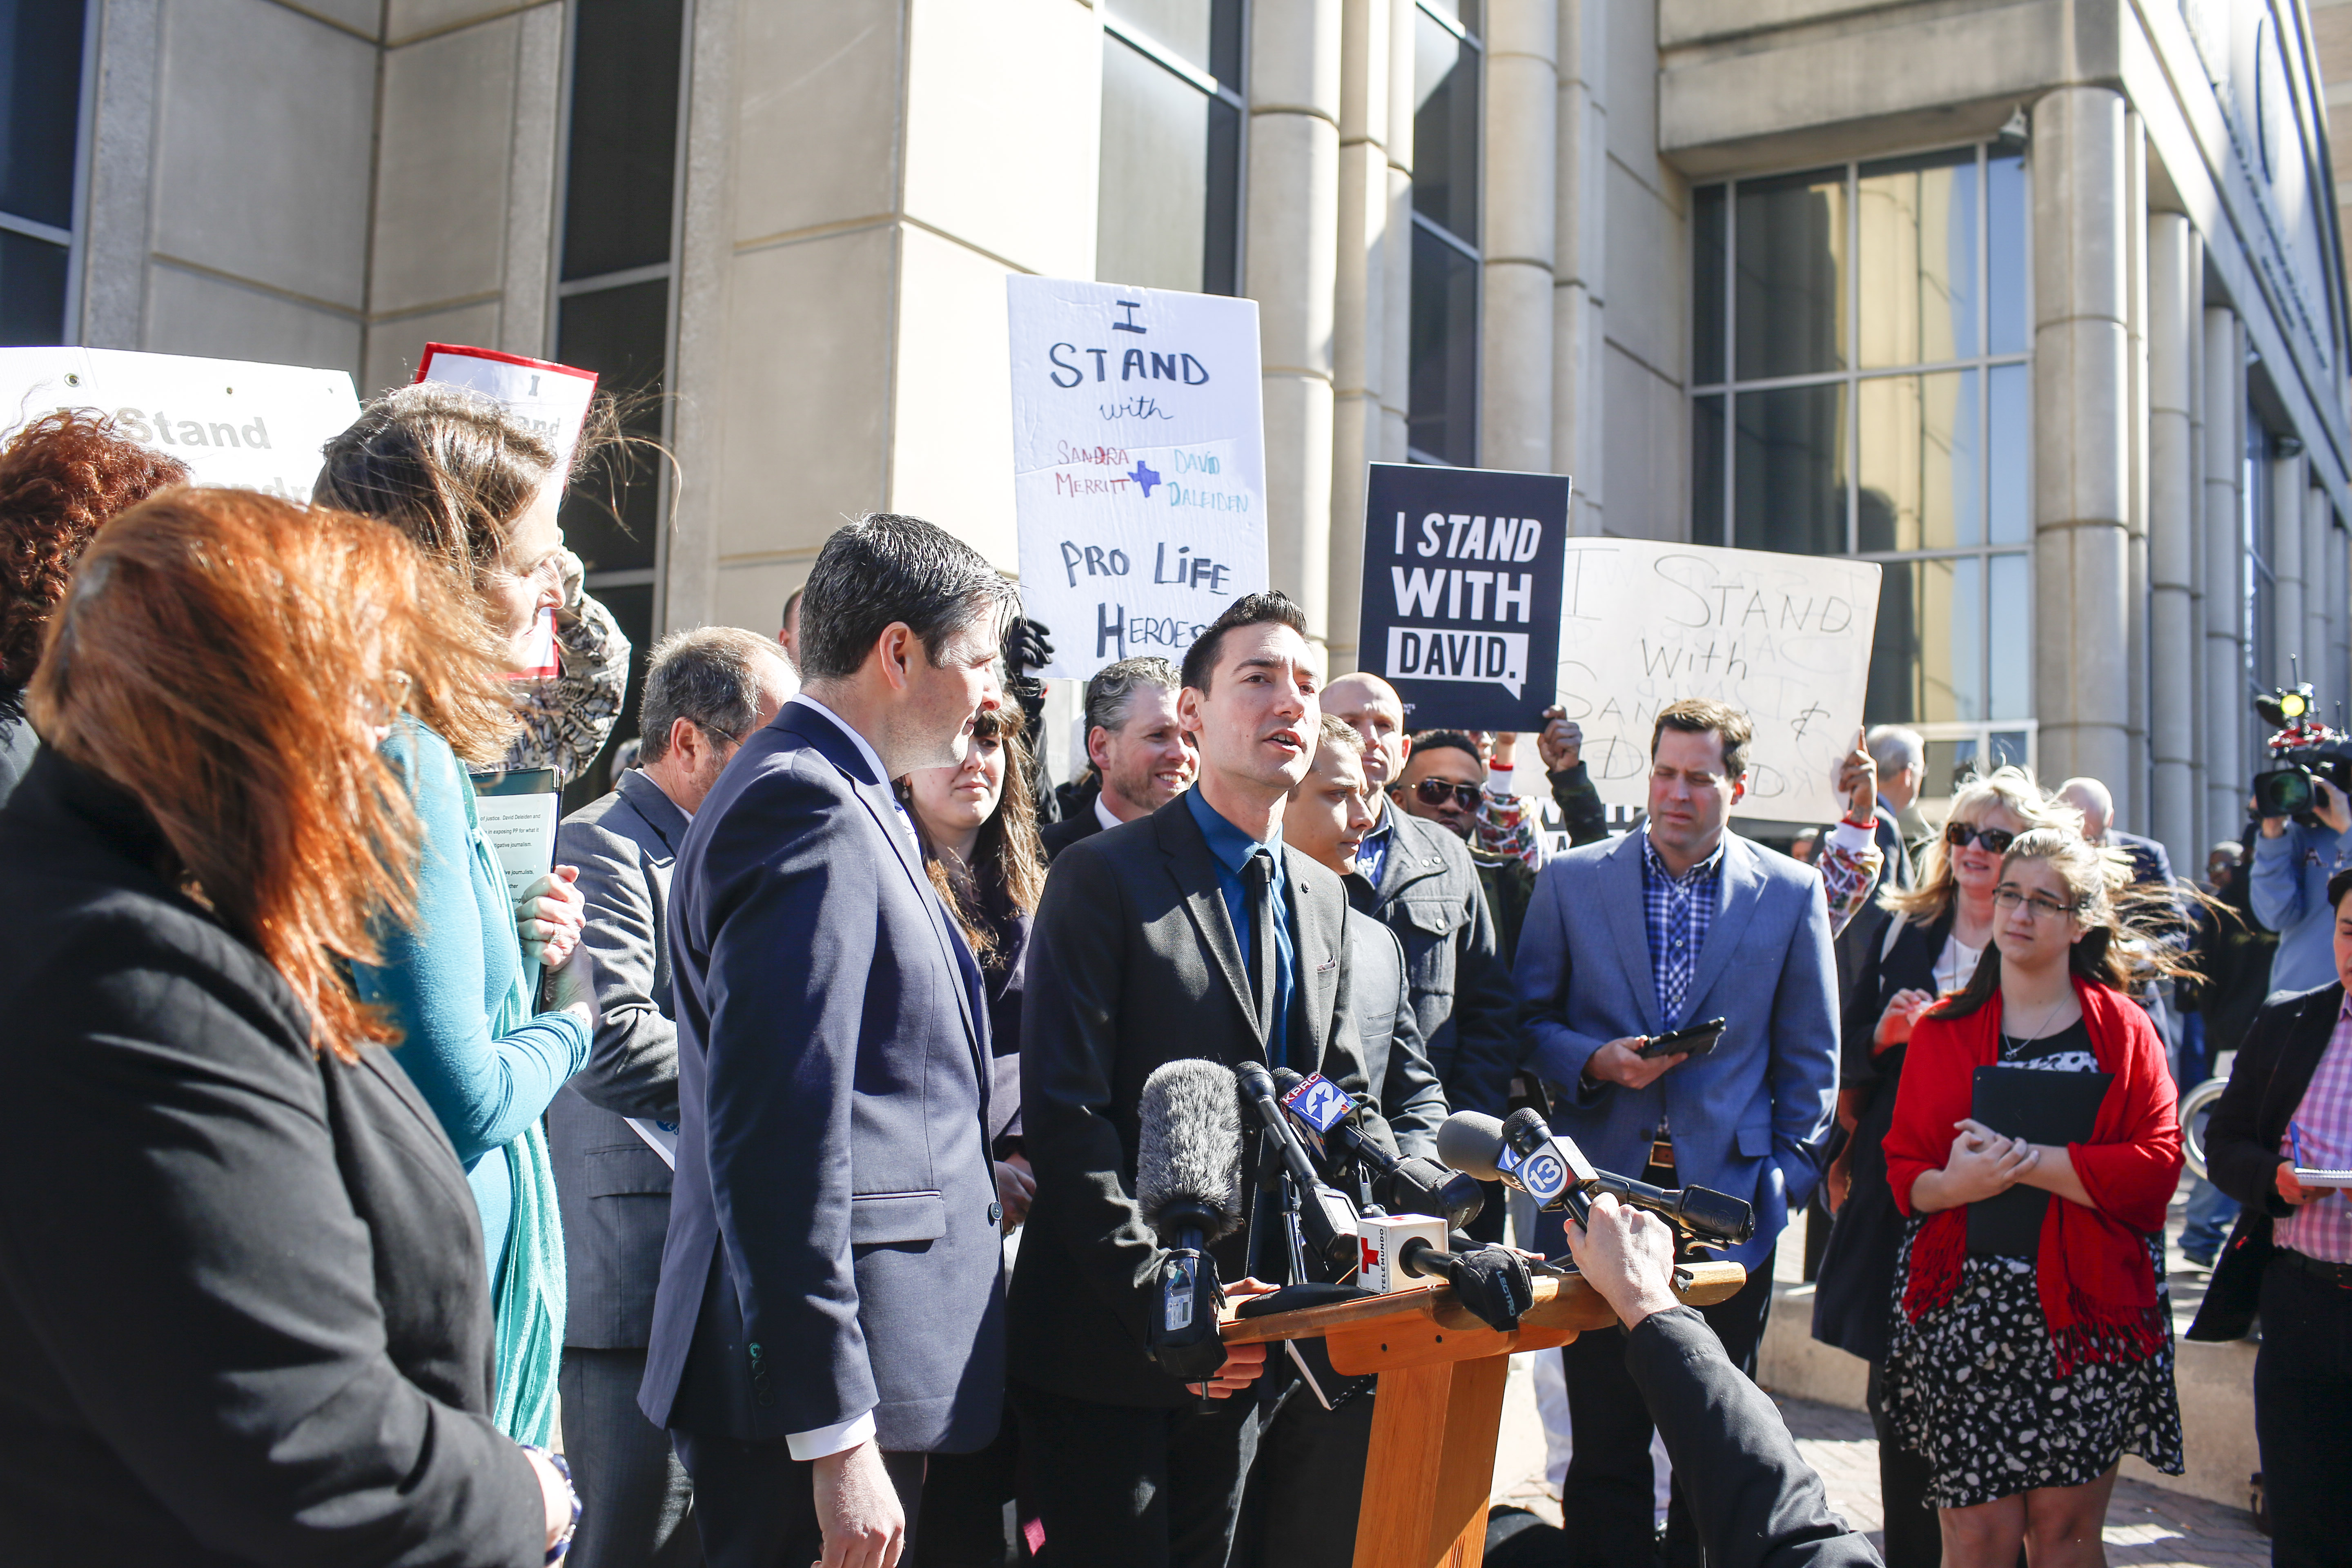 HOUSTON, TX - FEBRUARY 04: David Daleiden, a defendant in an indictment stemming from a Planned Parenthood video he helped produce, speaks to the media after appearing in court at the Harris County Courthouse on February 4, 2016 in Houston, Texas. Daleiden is facing an indictment on a misdemeanor count of purchasing human organs, and along with defendant Sandra Merritt, is charged with tampering with a governmental record. (Photo by Eric Kayne/Getty Images)